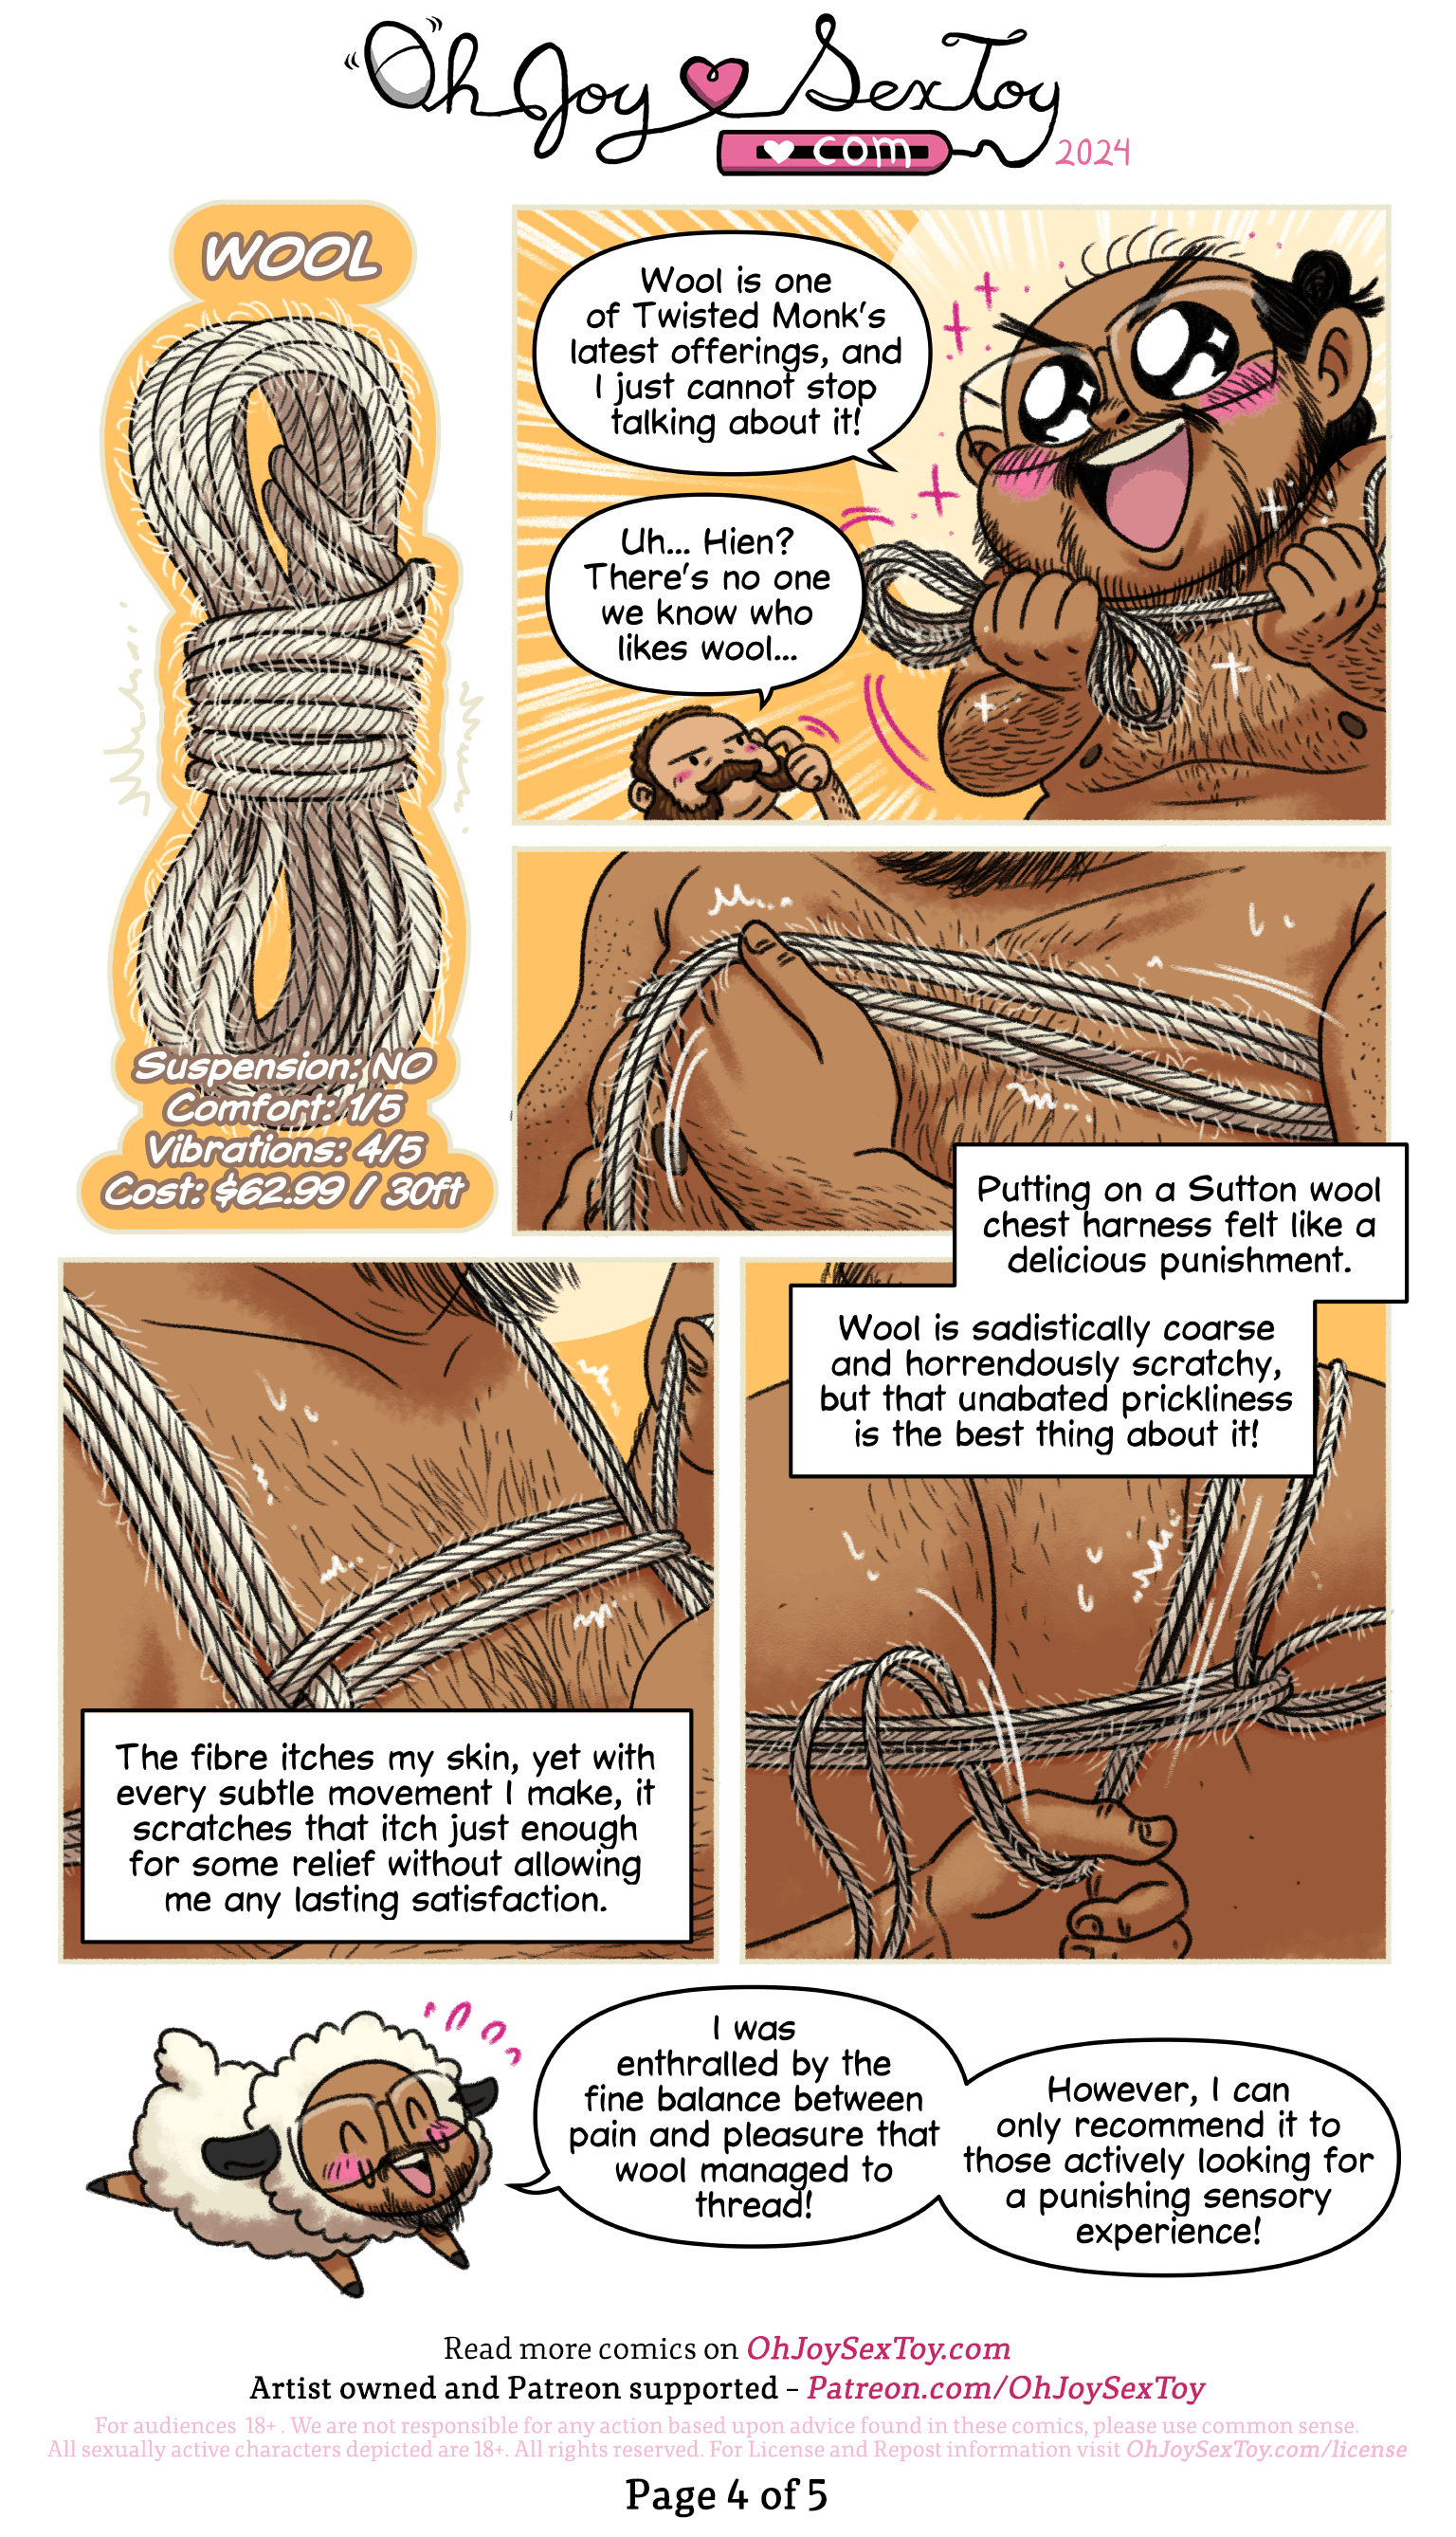 Five Twisted Monk Rope Fibres by Hien Pham